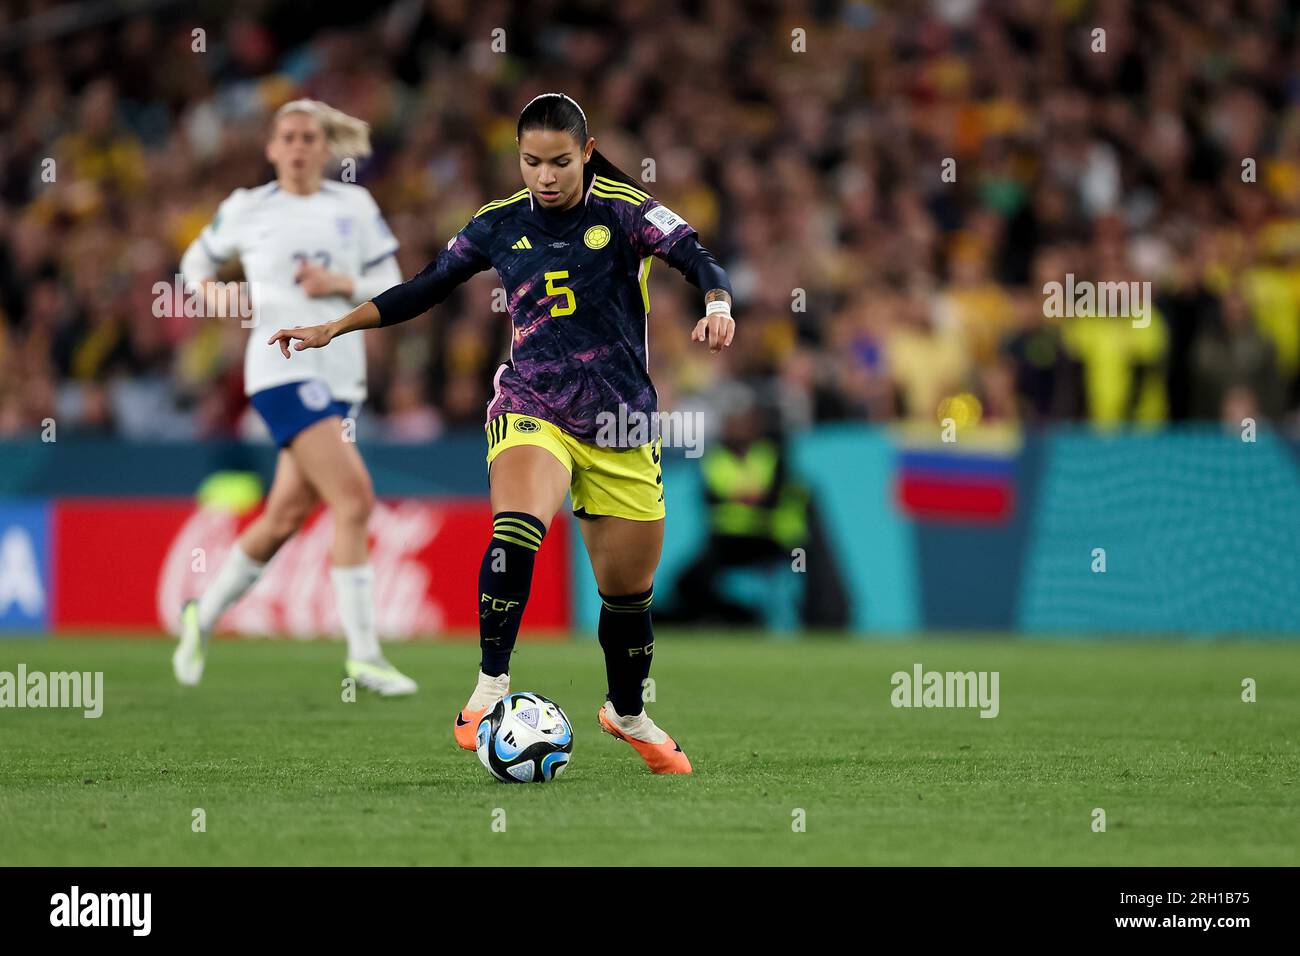 Sydney, Australia, 12 August, 2023. Lorena Bedoya Durango of Colombia controls the ball during the Women's World Cup quarter final football match between the England and Colombia at Stadium Australia on August 12, 2023 in Sydney, Australia. Credit: Damian Briggs/Speed Media/Alamy Live News Stock Photo